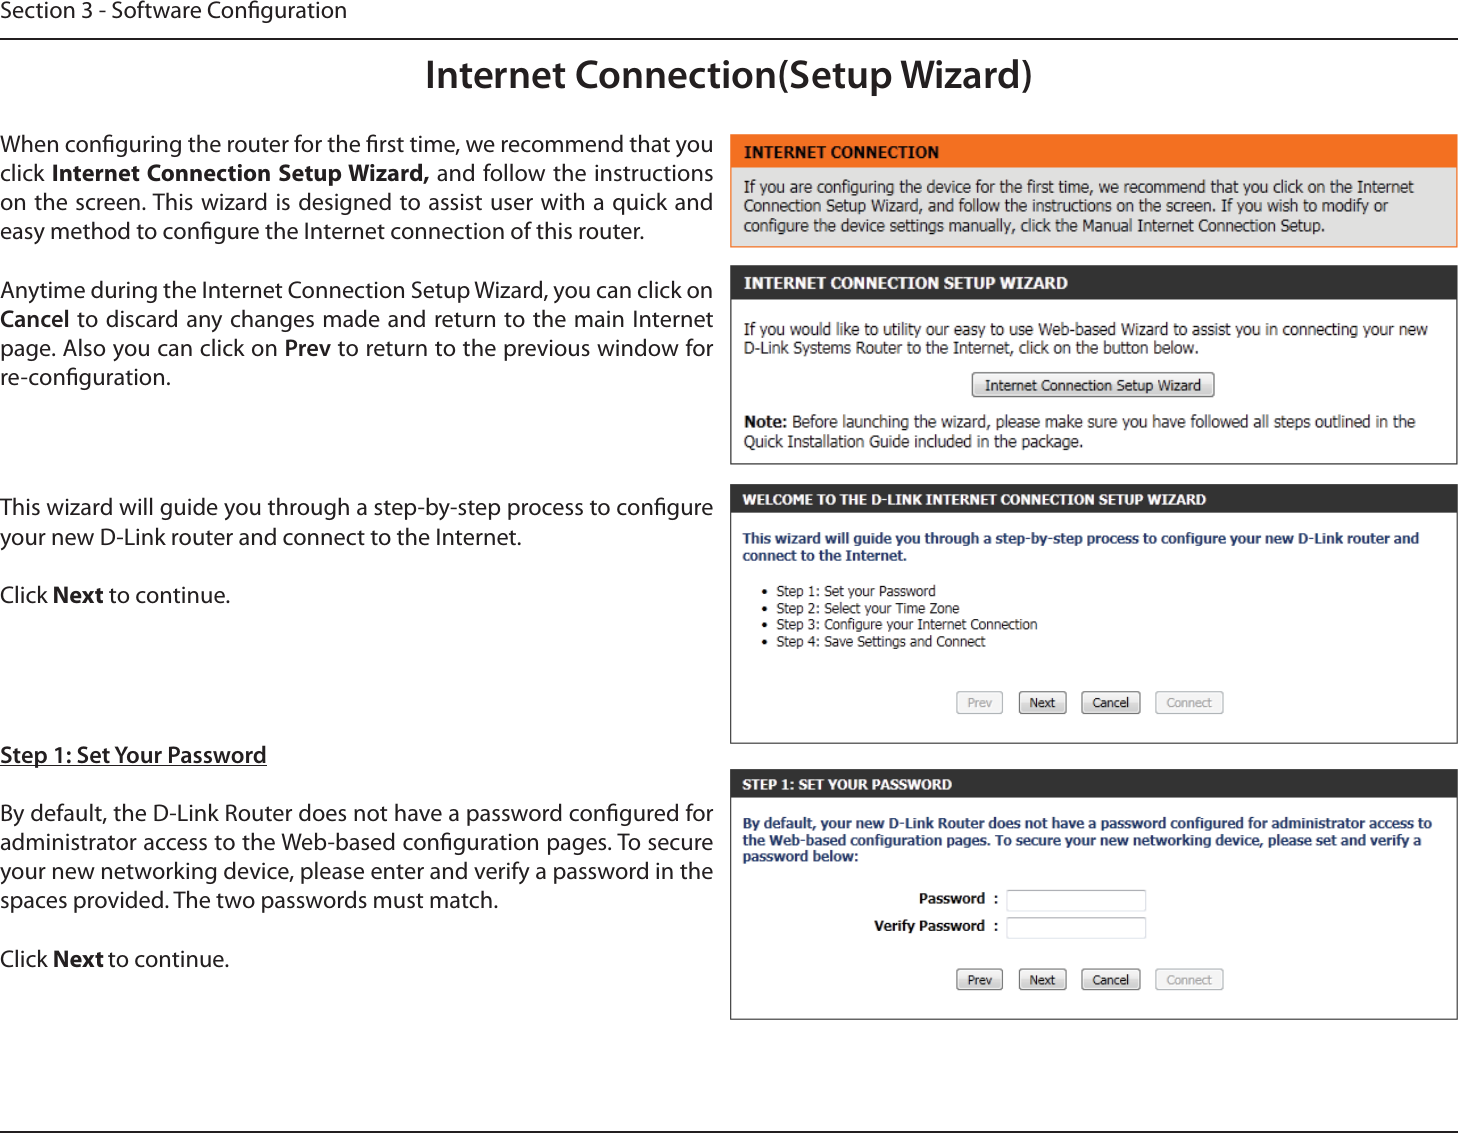 Section 3 - Software CongurationInternet Connection(Setup Wizard)When conguring the router for the rst time, we recommend that you click Internet Connection Setup Wizard, and follow the instructions on the screen. This wizard is designed to assist user with a quick and easy method to congure the Internet connection of this router.Anytime during the Internet Connection Setup Wizard, you can click on Cancel to discard any changes made and return to the main Internet page. Also you can click on Prev to return to the previous window for re-conguration.This wizard will guide you through a step-by-step process to congure your new D-Link router and connect to the Internet. Click Next to continue.Step 1: Set Your PasswordBy default, the D-Link Router does not have a password congured for administrator access to the Web-based conguration pages. To secure your new networking device, please enter and verify a password in the spaces provided. The two passwords must match.Click Next to continue.